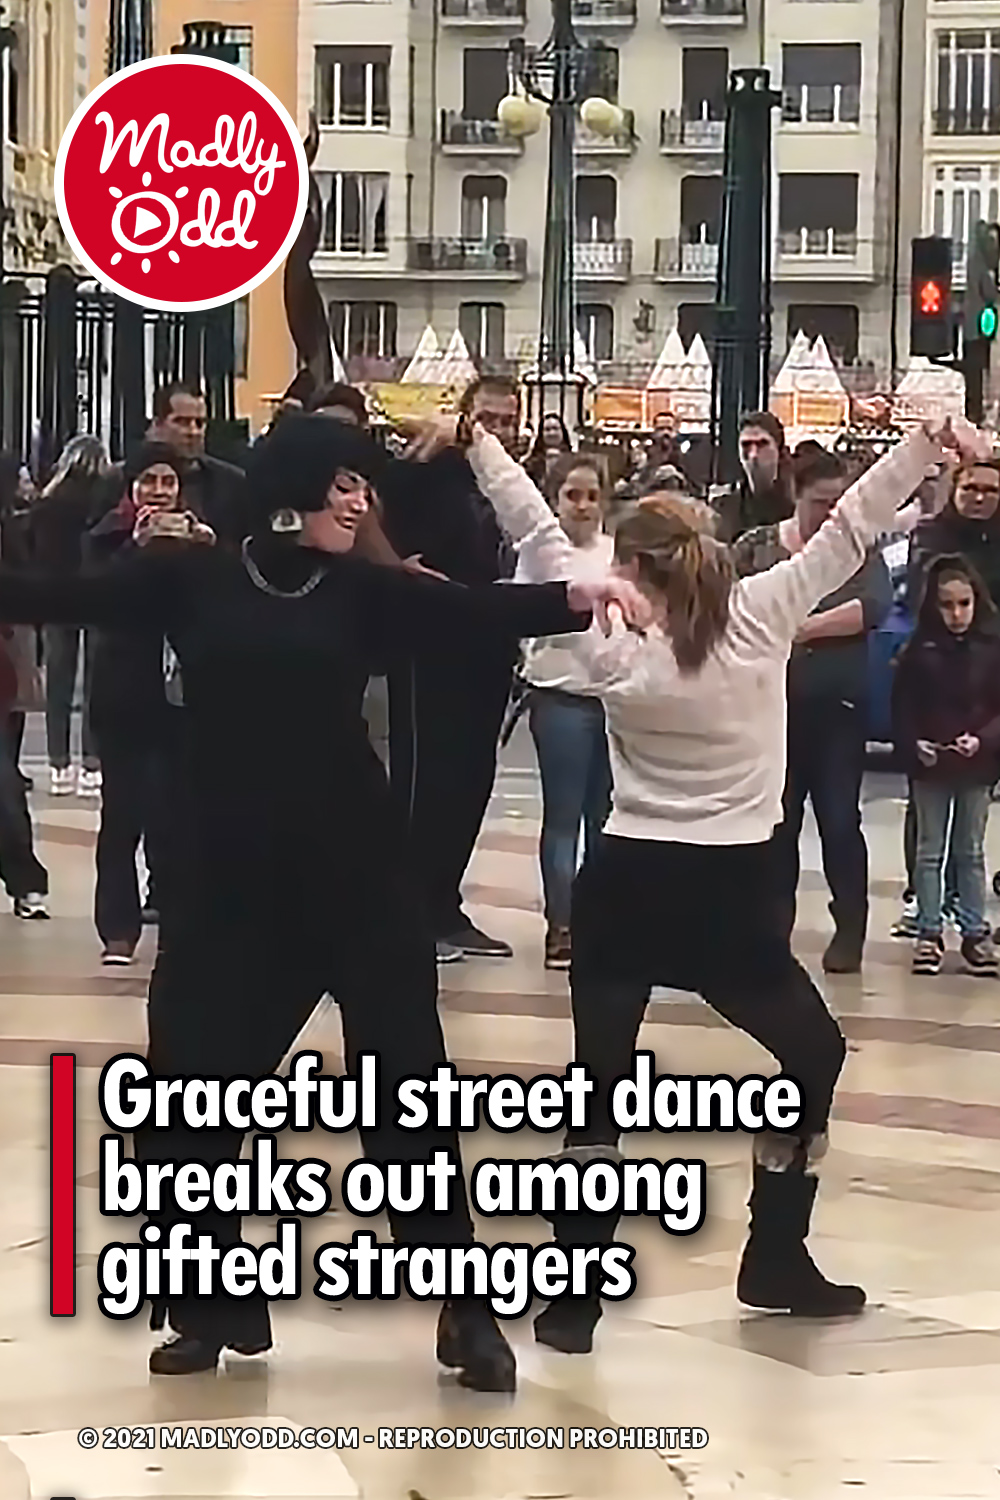 Graceful street dance breaks out among gifted strangers